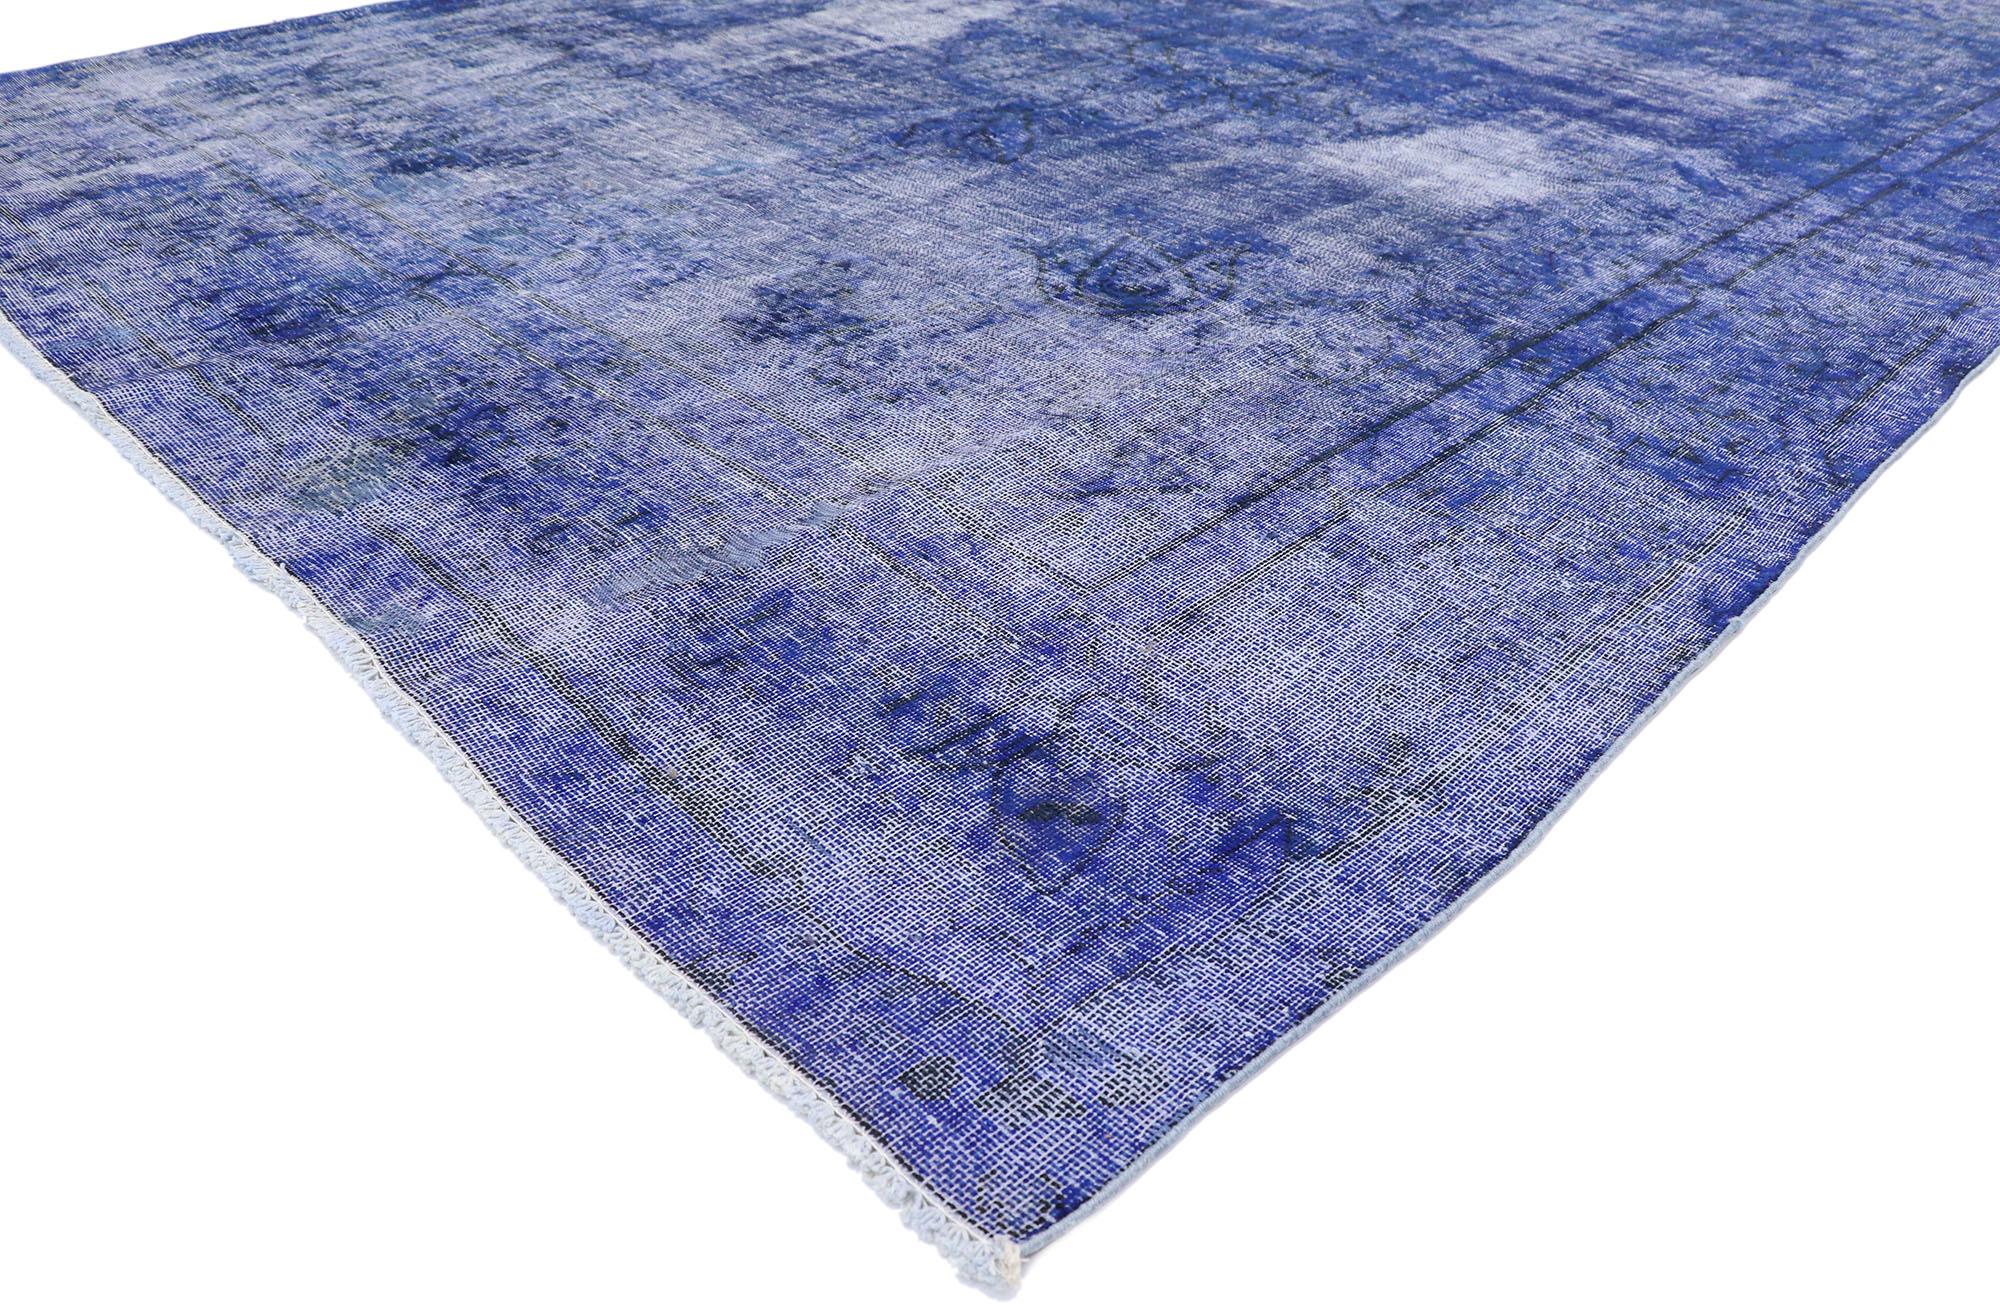 80243 distressed vintage blue overdyed Persian rug with Modern style. With a bold and striking design aesthetic combined with a lovingly time-worn appearance, this hand knotted wool vintage blue overdyed Persian rug can beautifully blend